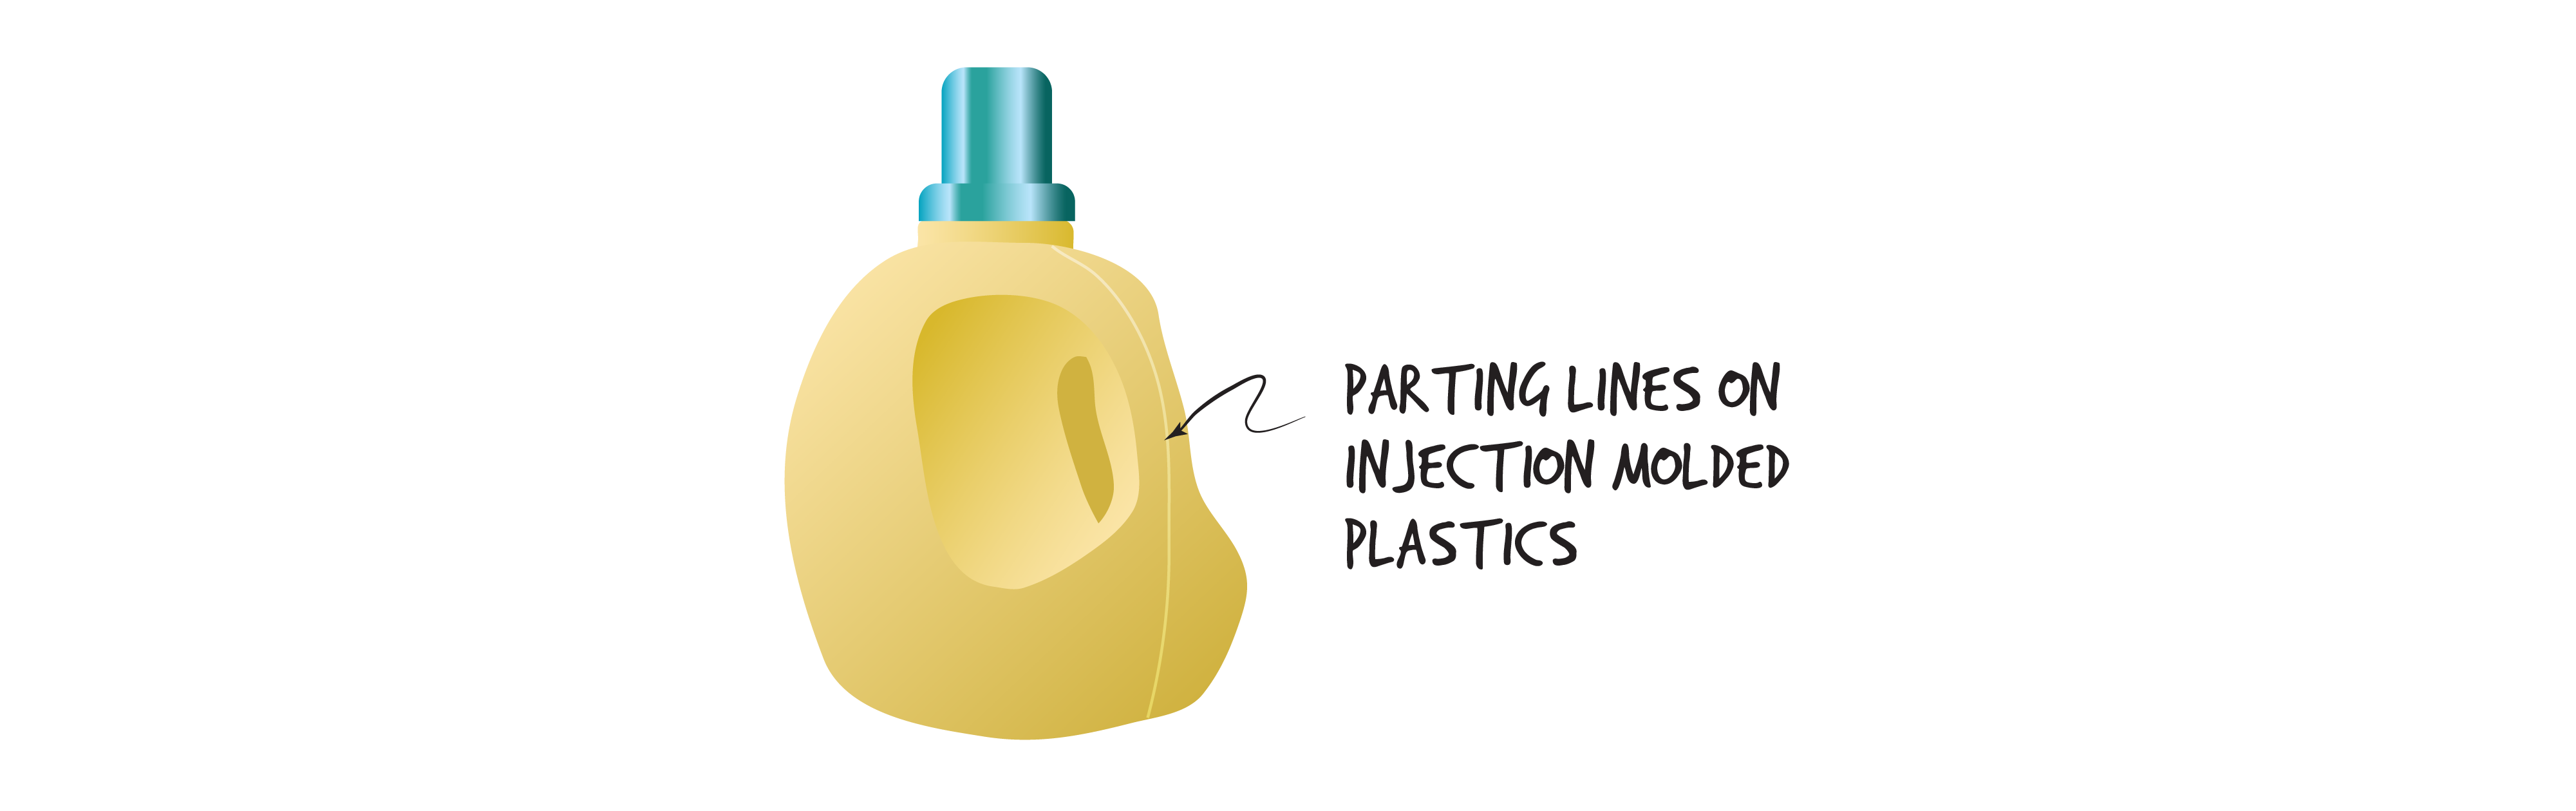 Large plastic yellow container with blue lid. Text Parting lines on injection molded plastics. An arrow points from the text to the line following contour of bottle.